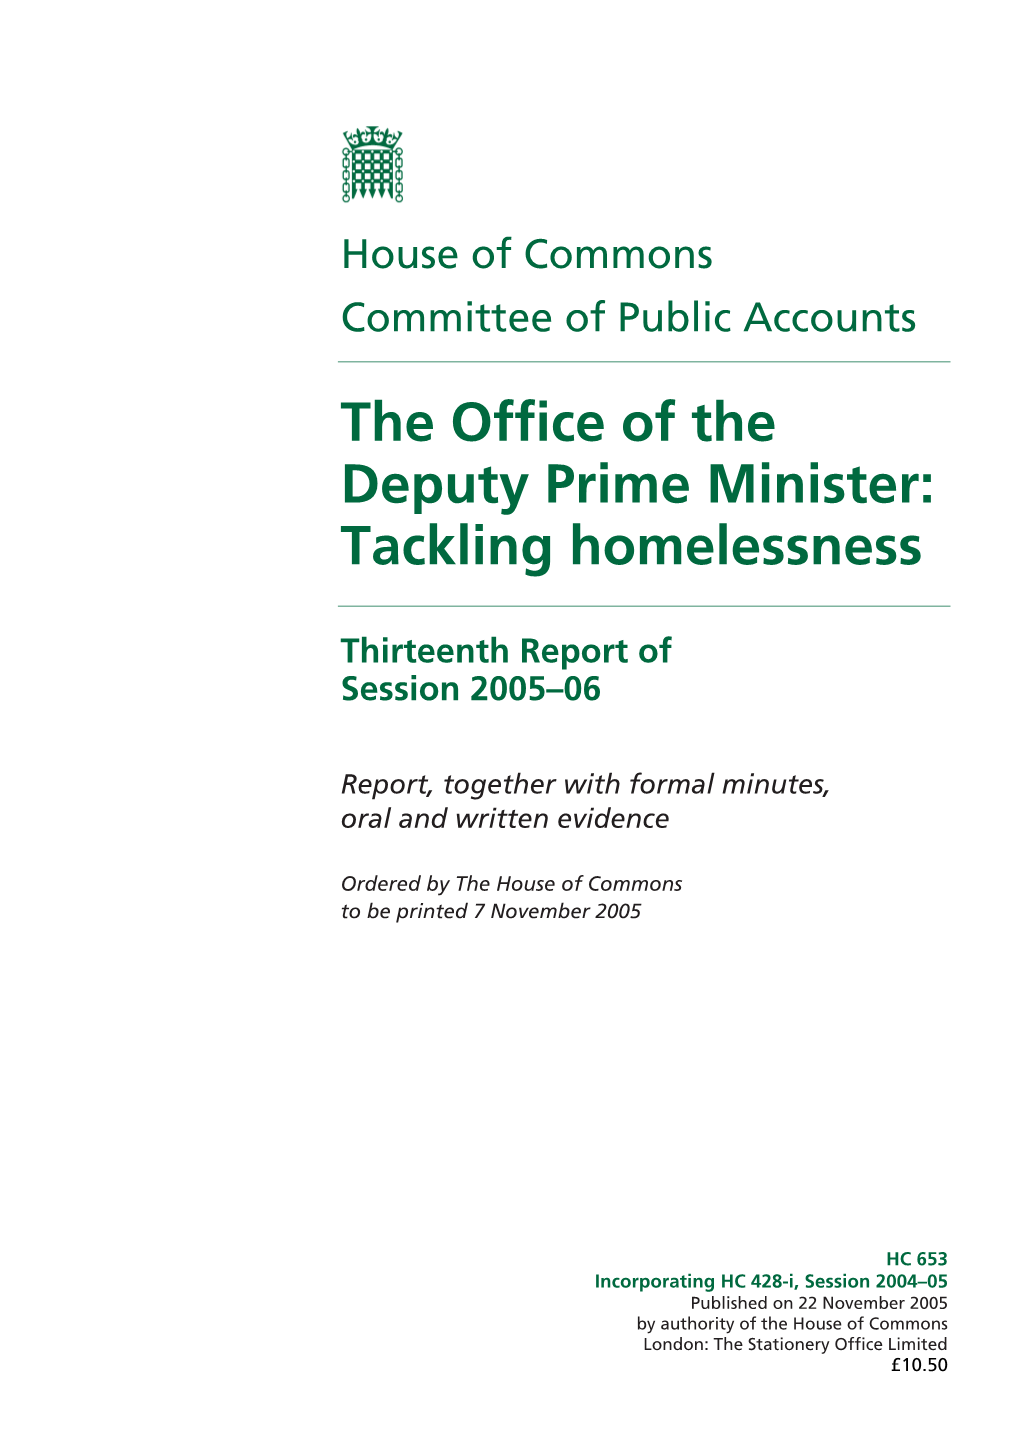 The Office of the Deputy Prime Minister: Tackling Homelessness